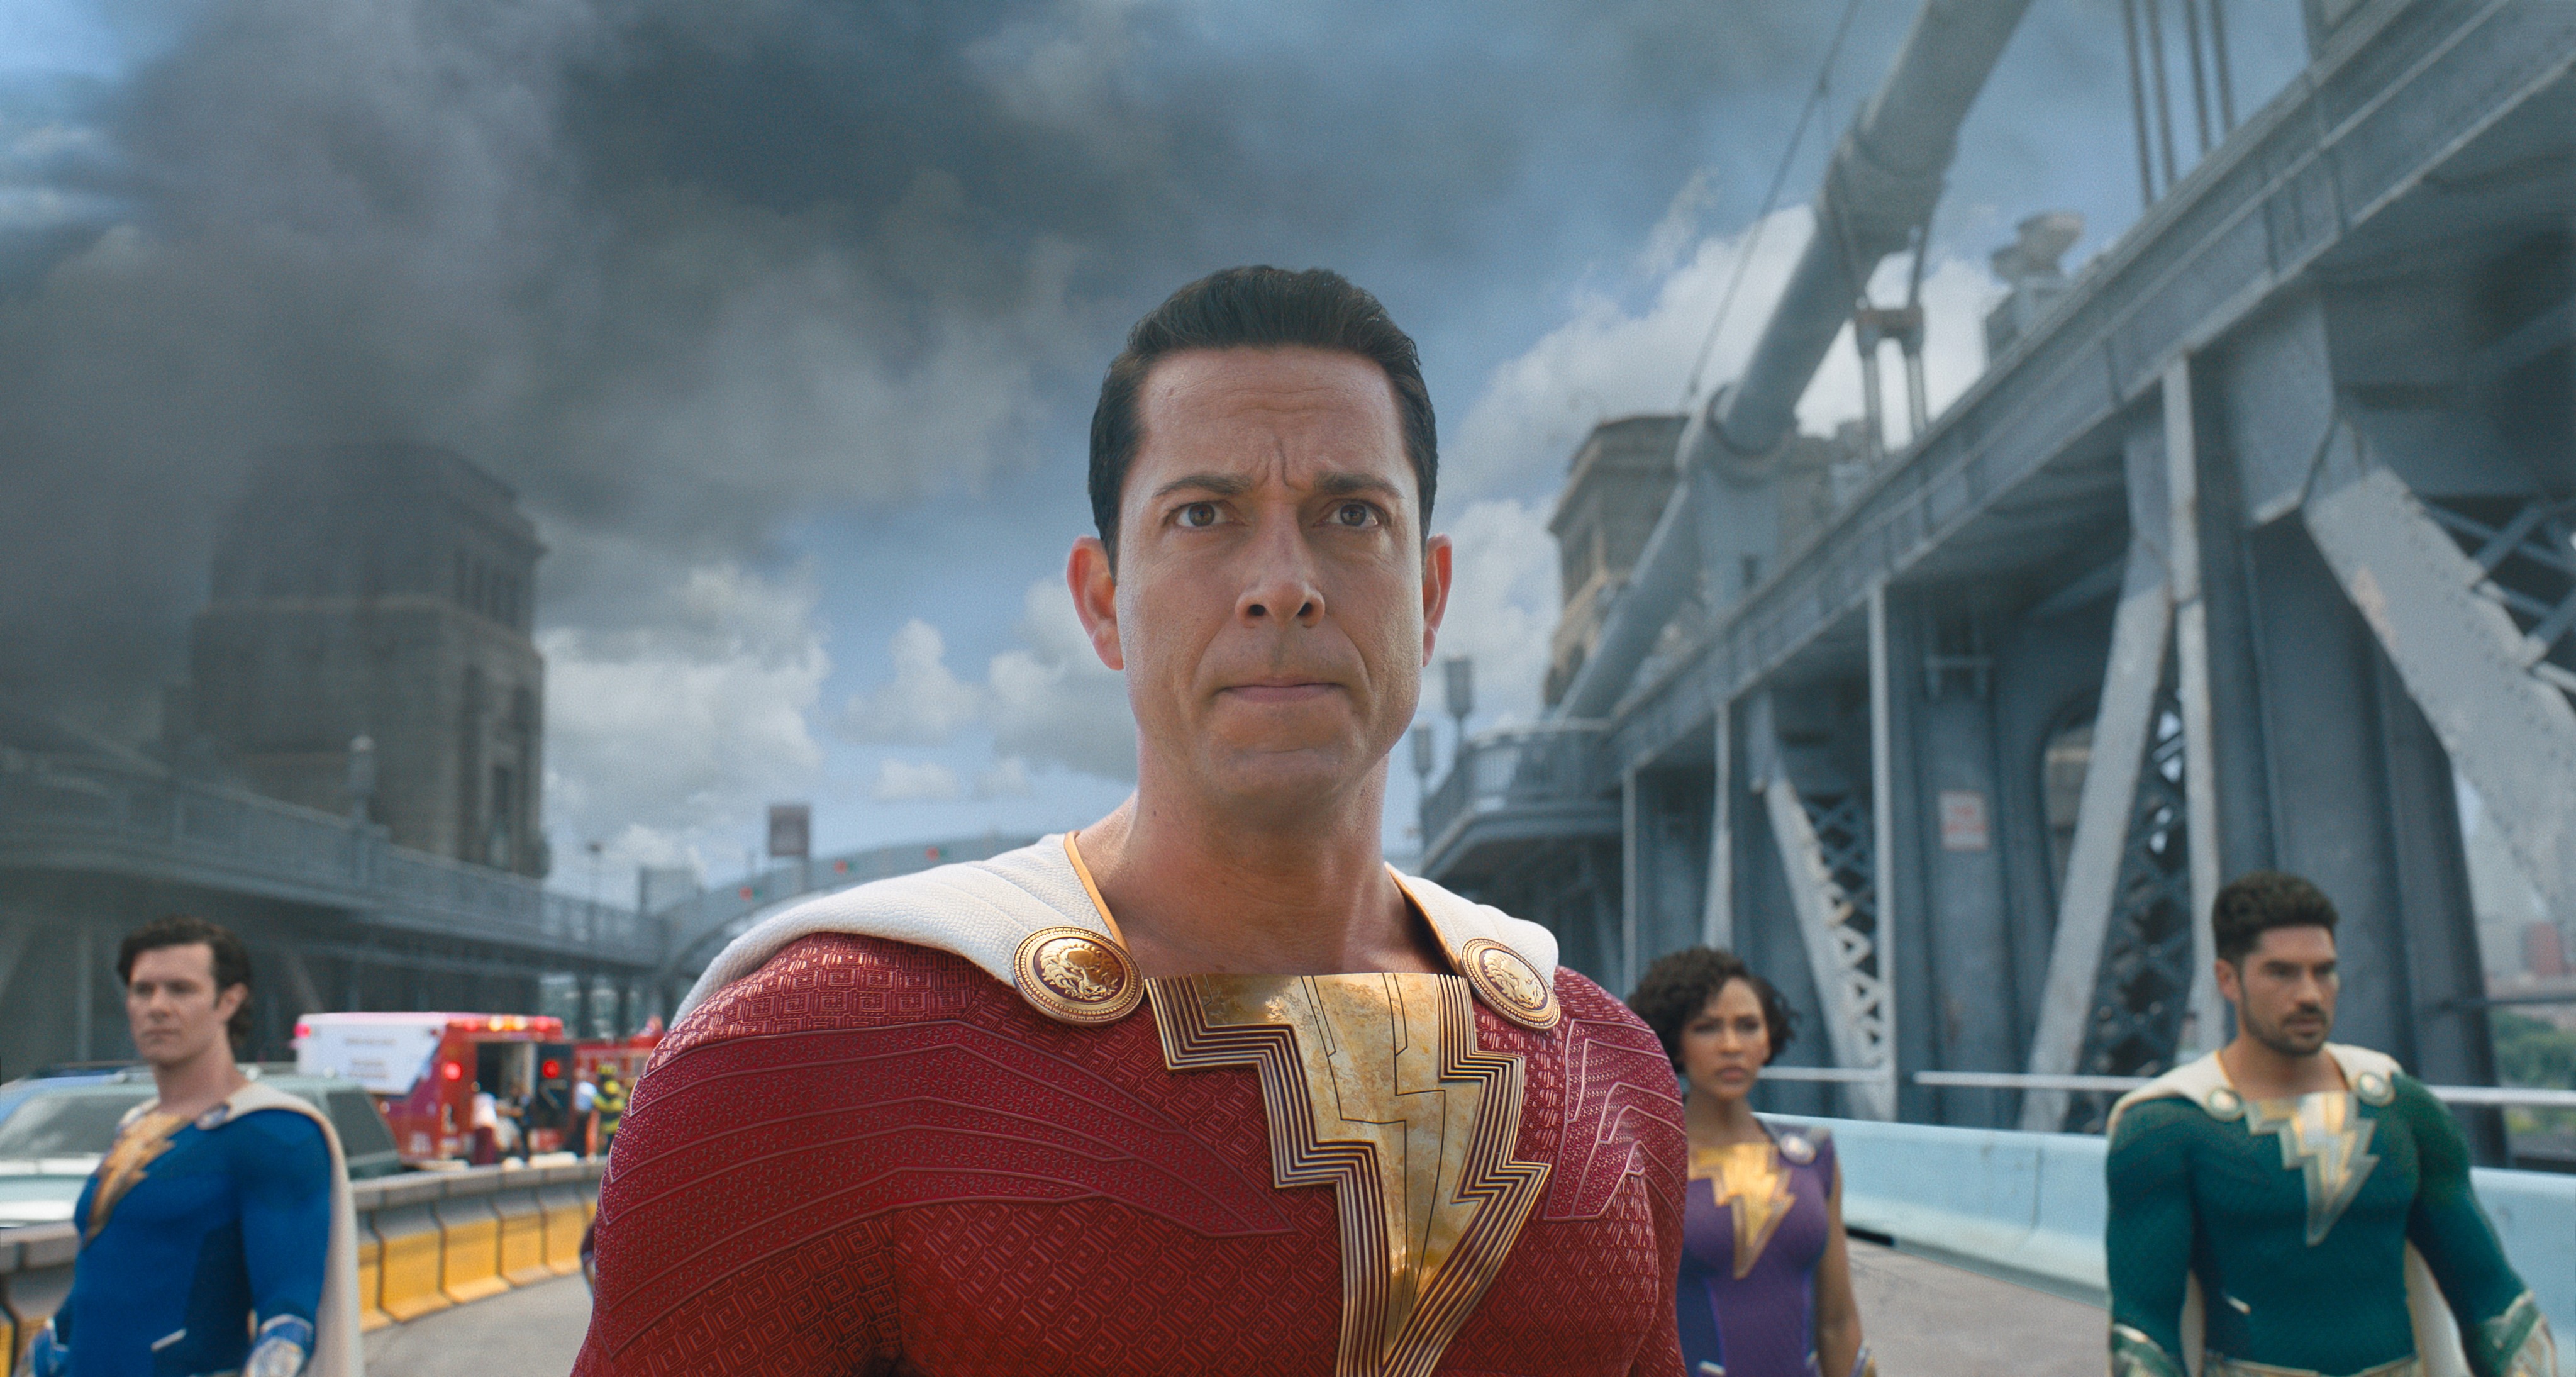 What to Watch: Shazam! Fury of the Gods, Ted Lasso S3, the Magical Shadow  and Bone S2, & More! 